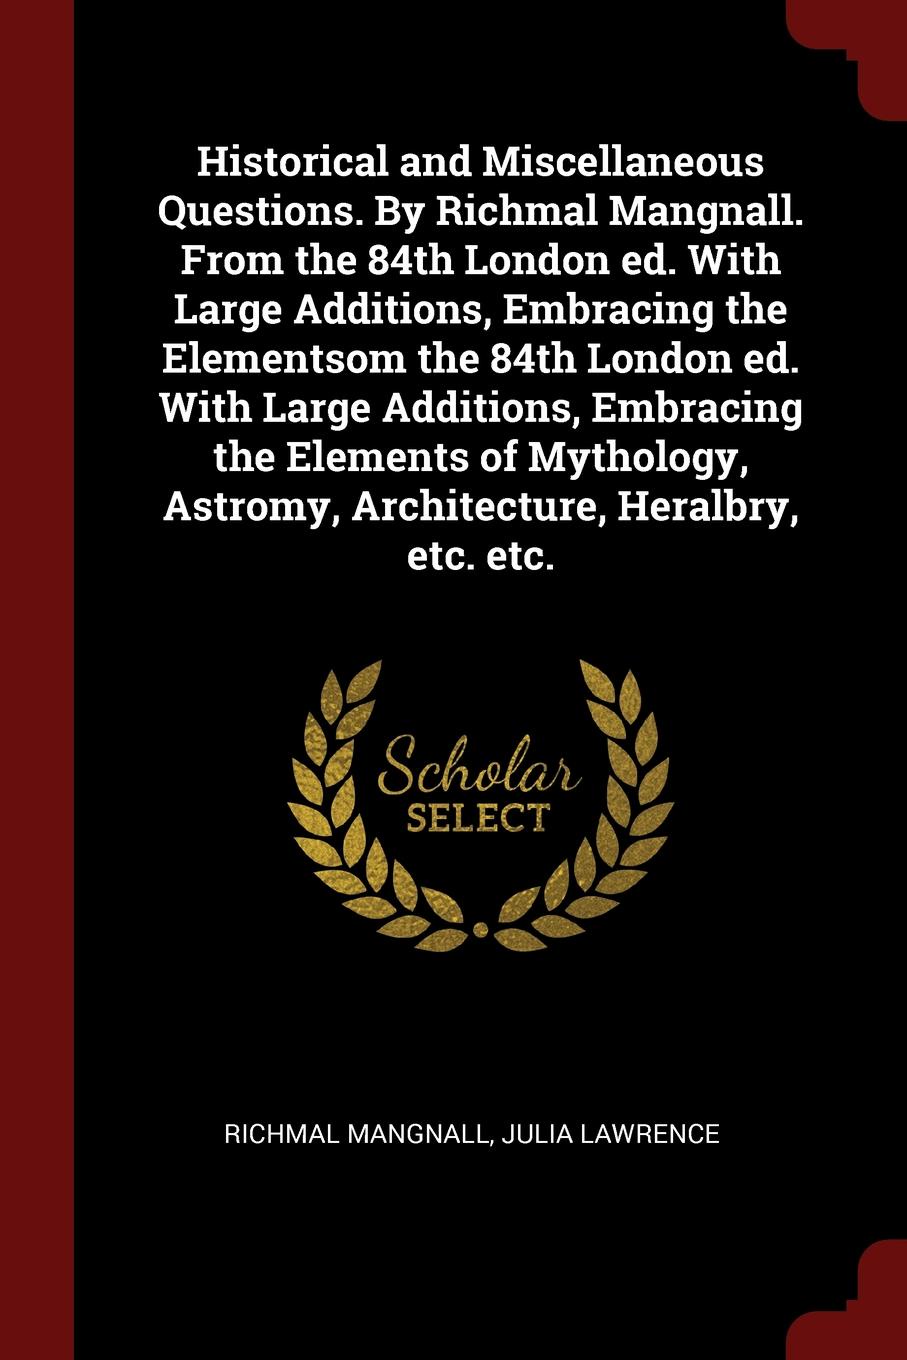 Historical and Miscellaneous Questions. By Richmal Mangnall. From the 84th London ed. With Large Additions, Embracing the Elementsom the 84th London ed. With Large Additions, Embracing the Elements of Mythology, Astromy, Architecture, Heralbry, et...